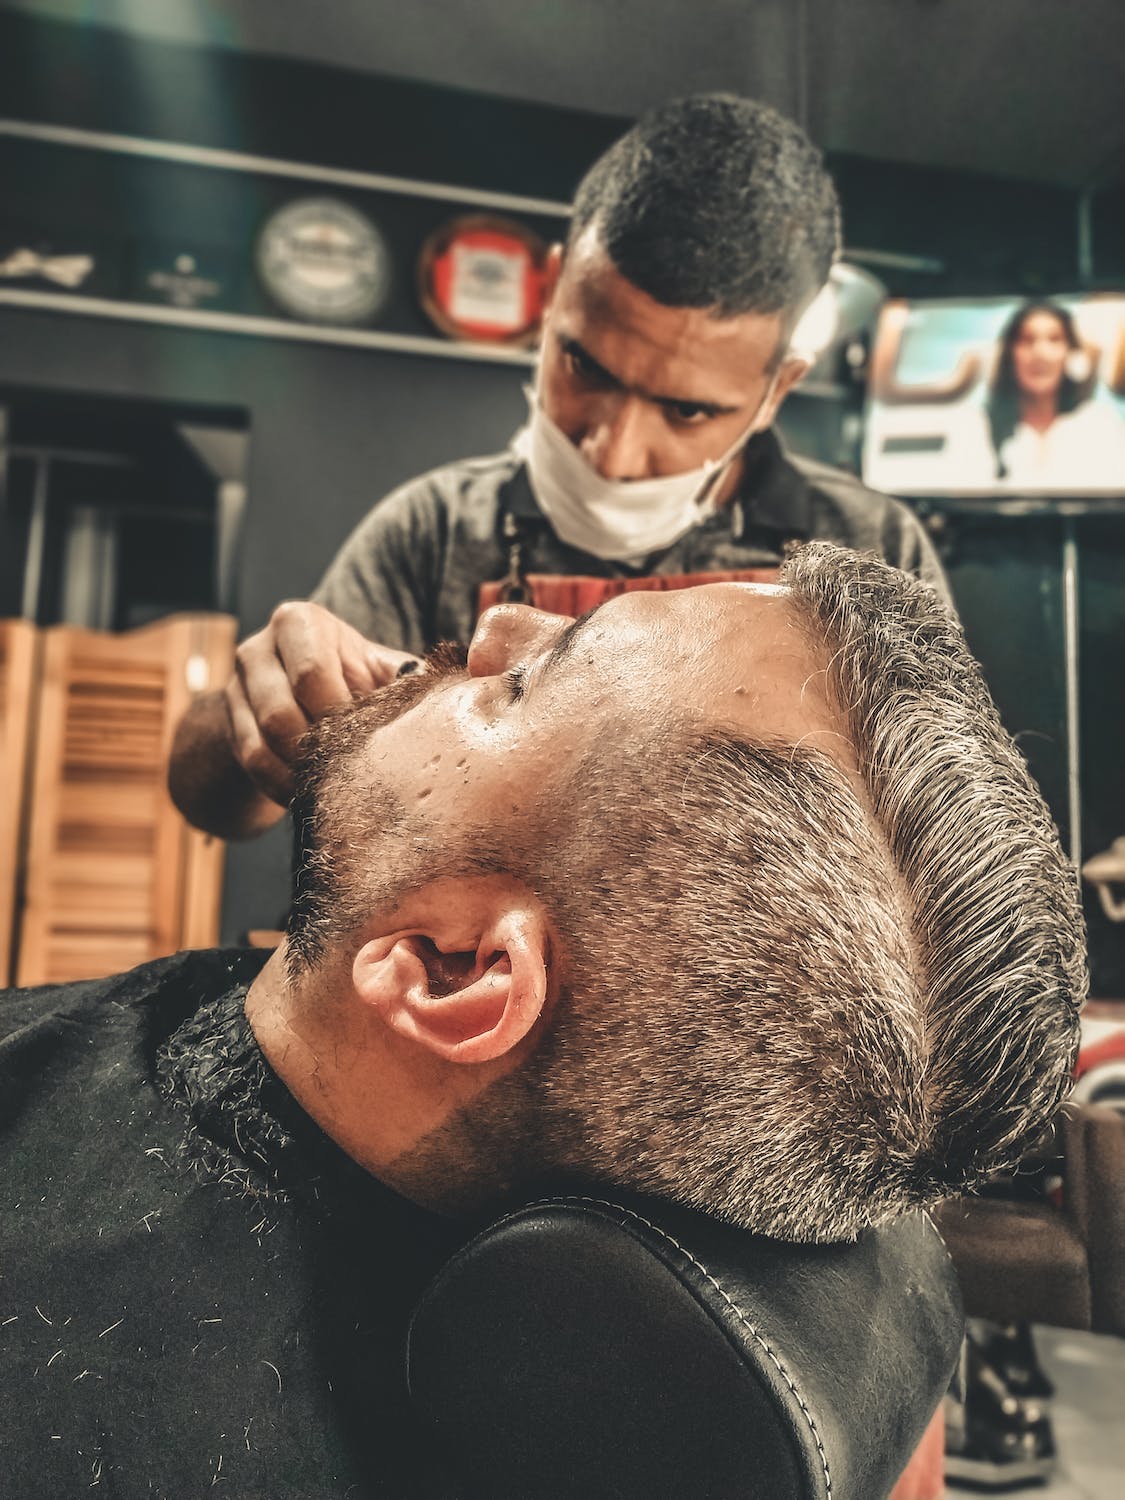 Barber trimming customers beard with electric trimmer